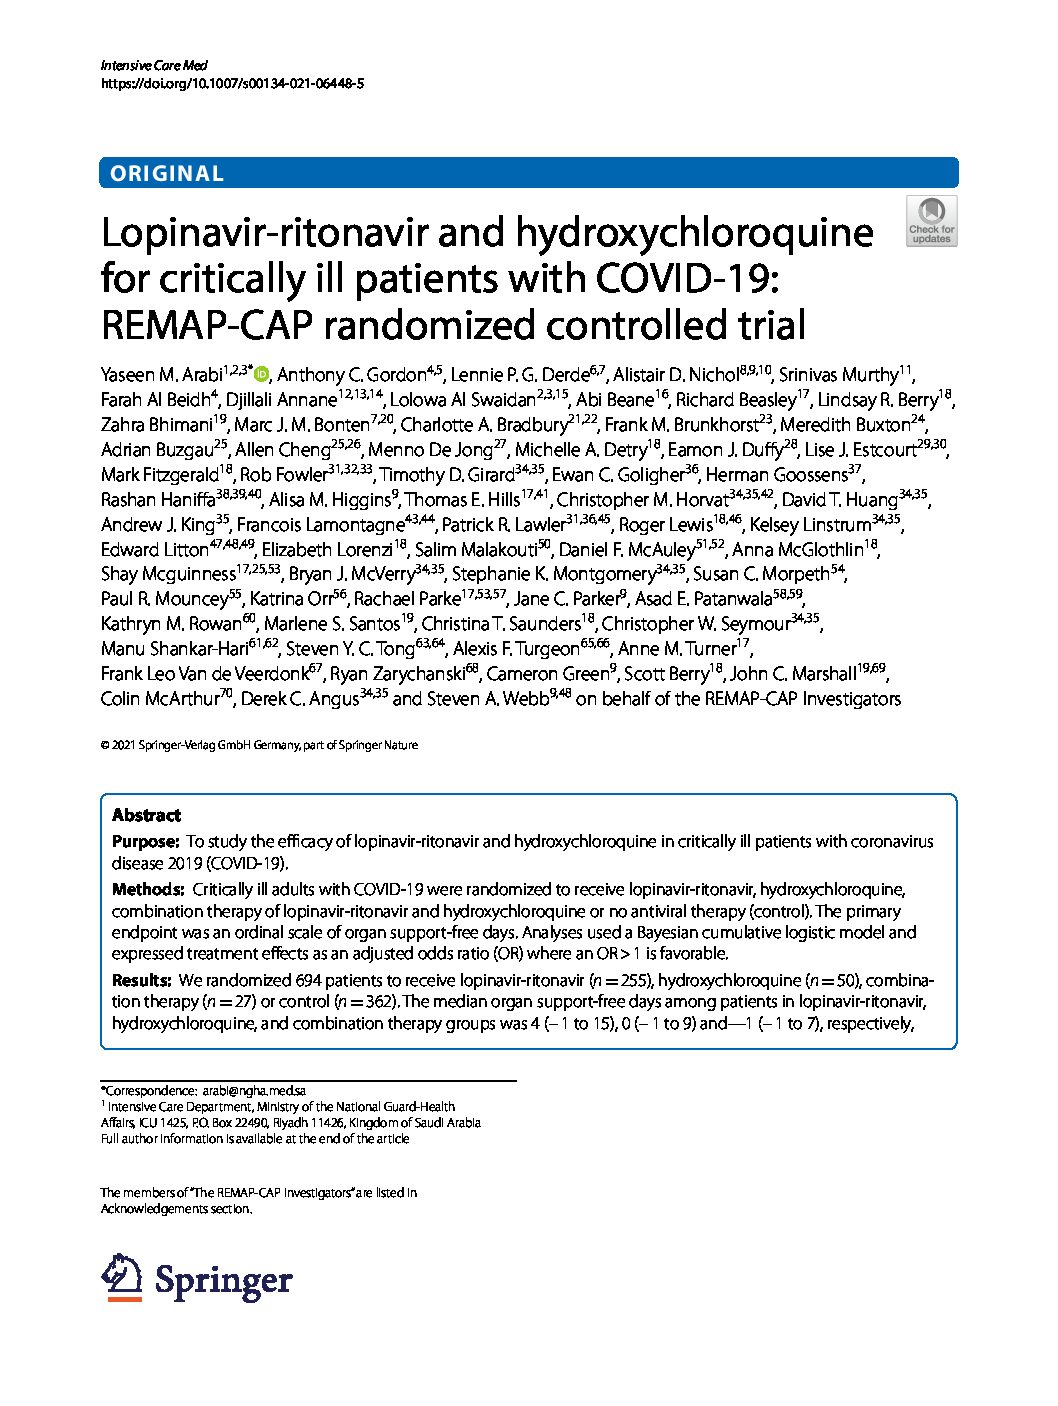 Read more about the article Lopinavir‑ritonavir and hydroxychloroquine for critically ill patients with COVID‑19: REMAP‑CAP randomized controlled trial